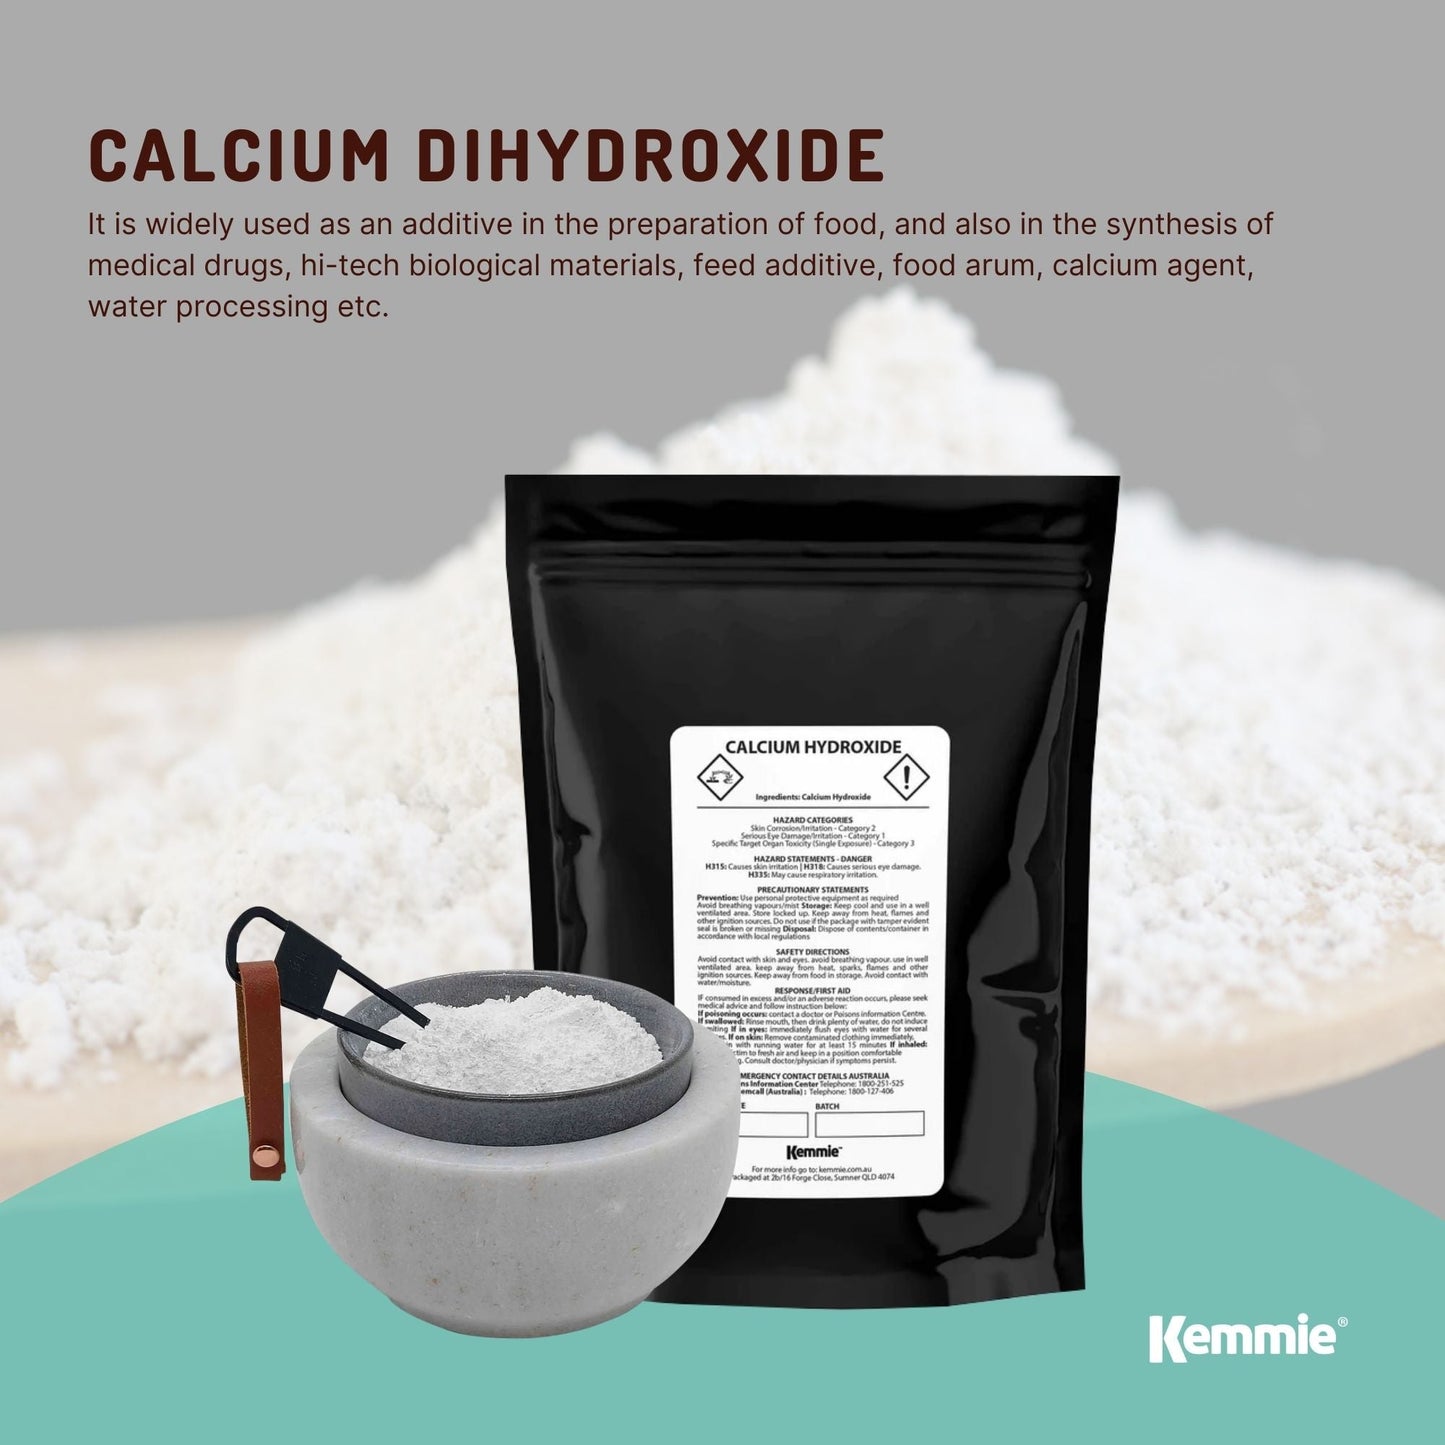 2Kg Food Grade Calcium Hydroxide Powder - FCC Hydrated Slaked Pickling Lime